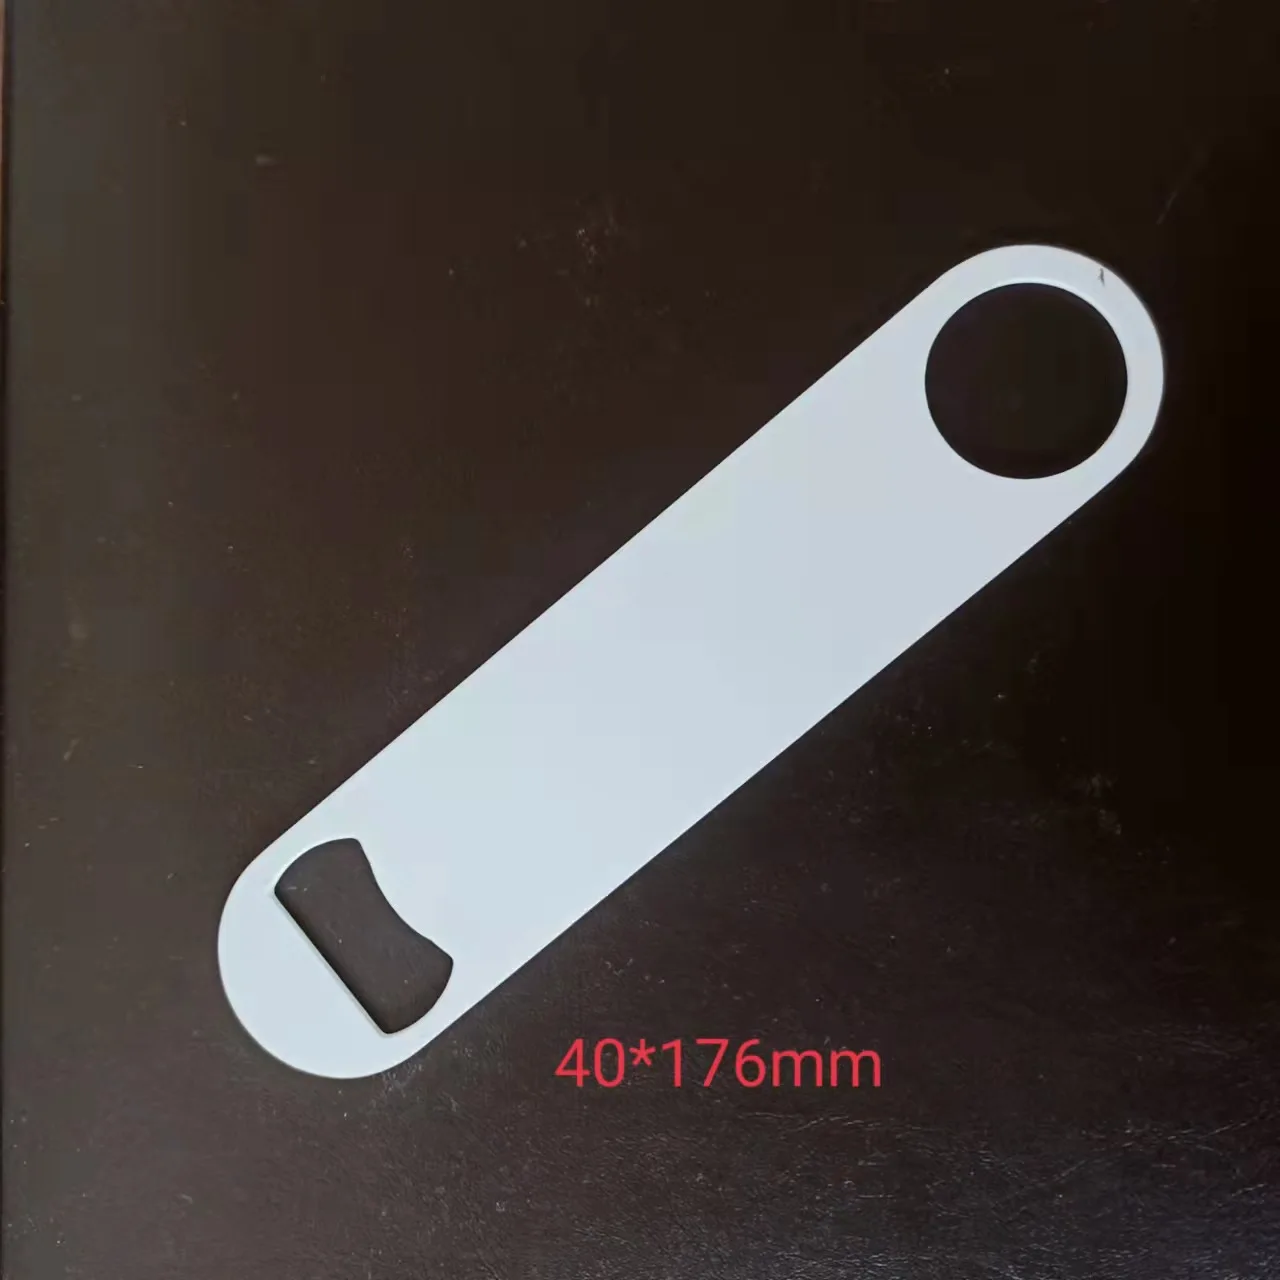 Factory Price!!! 100pcs/lot Bottle Beer Opener Cap Lifter Sublimation Blank White Dye INK Printing Heat Transfer High Quality factory price 50pcs lot bottle beer opener sublimation blank white for dye ink printing